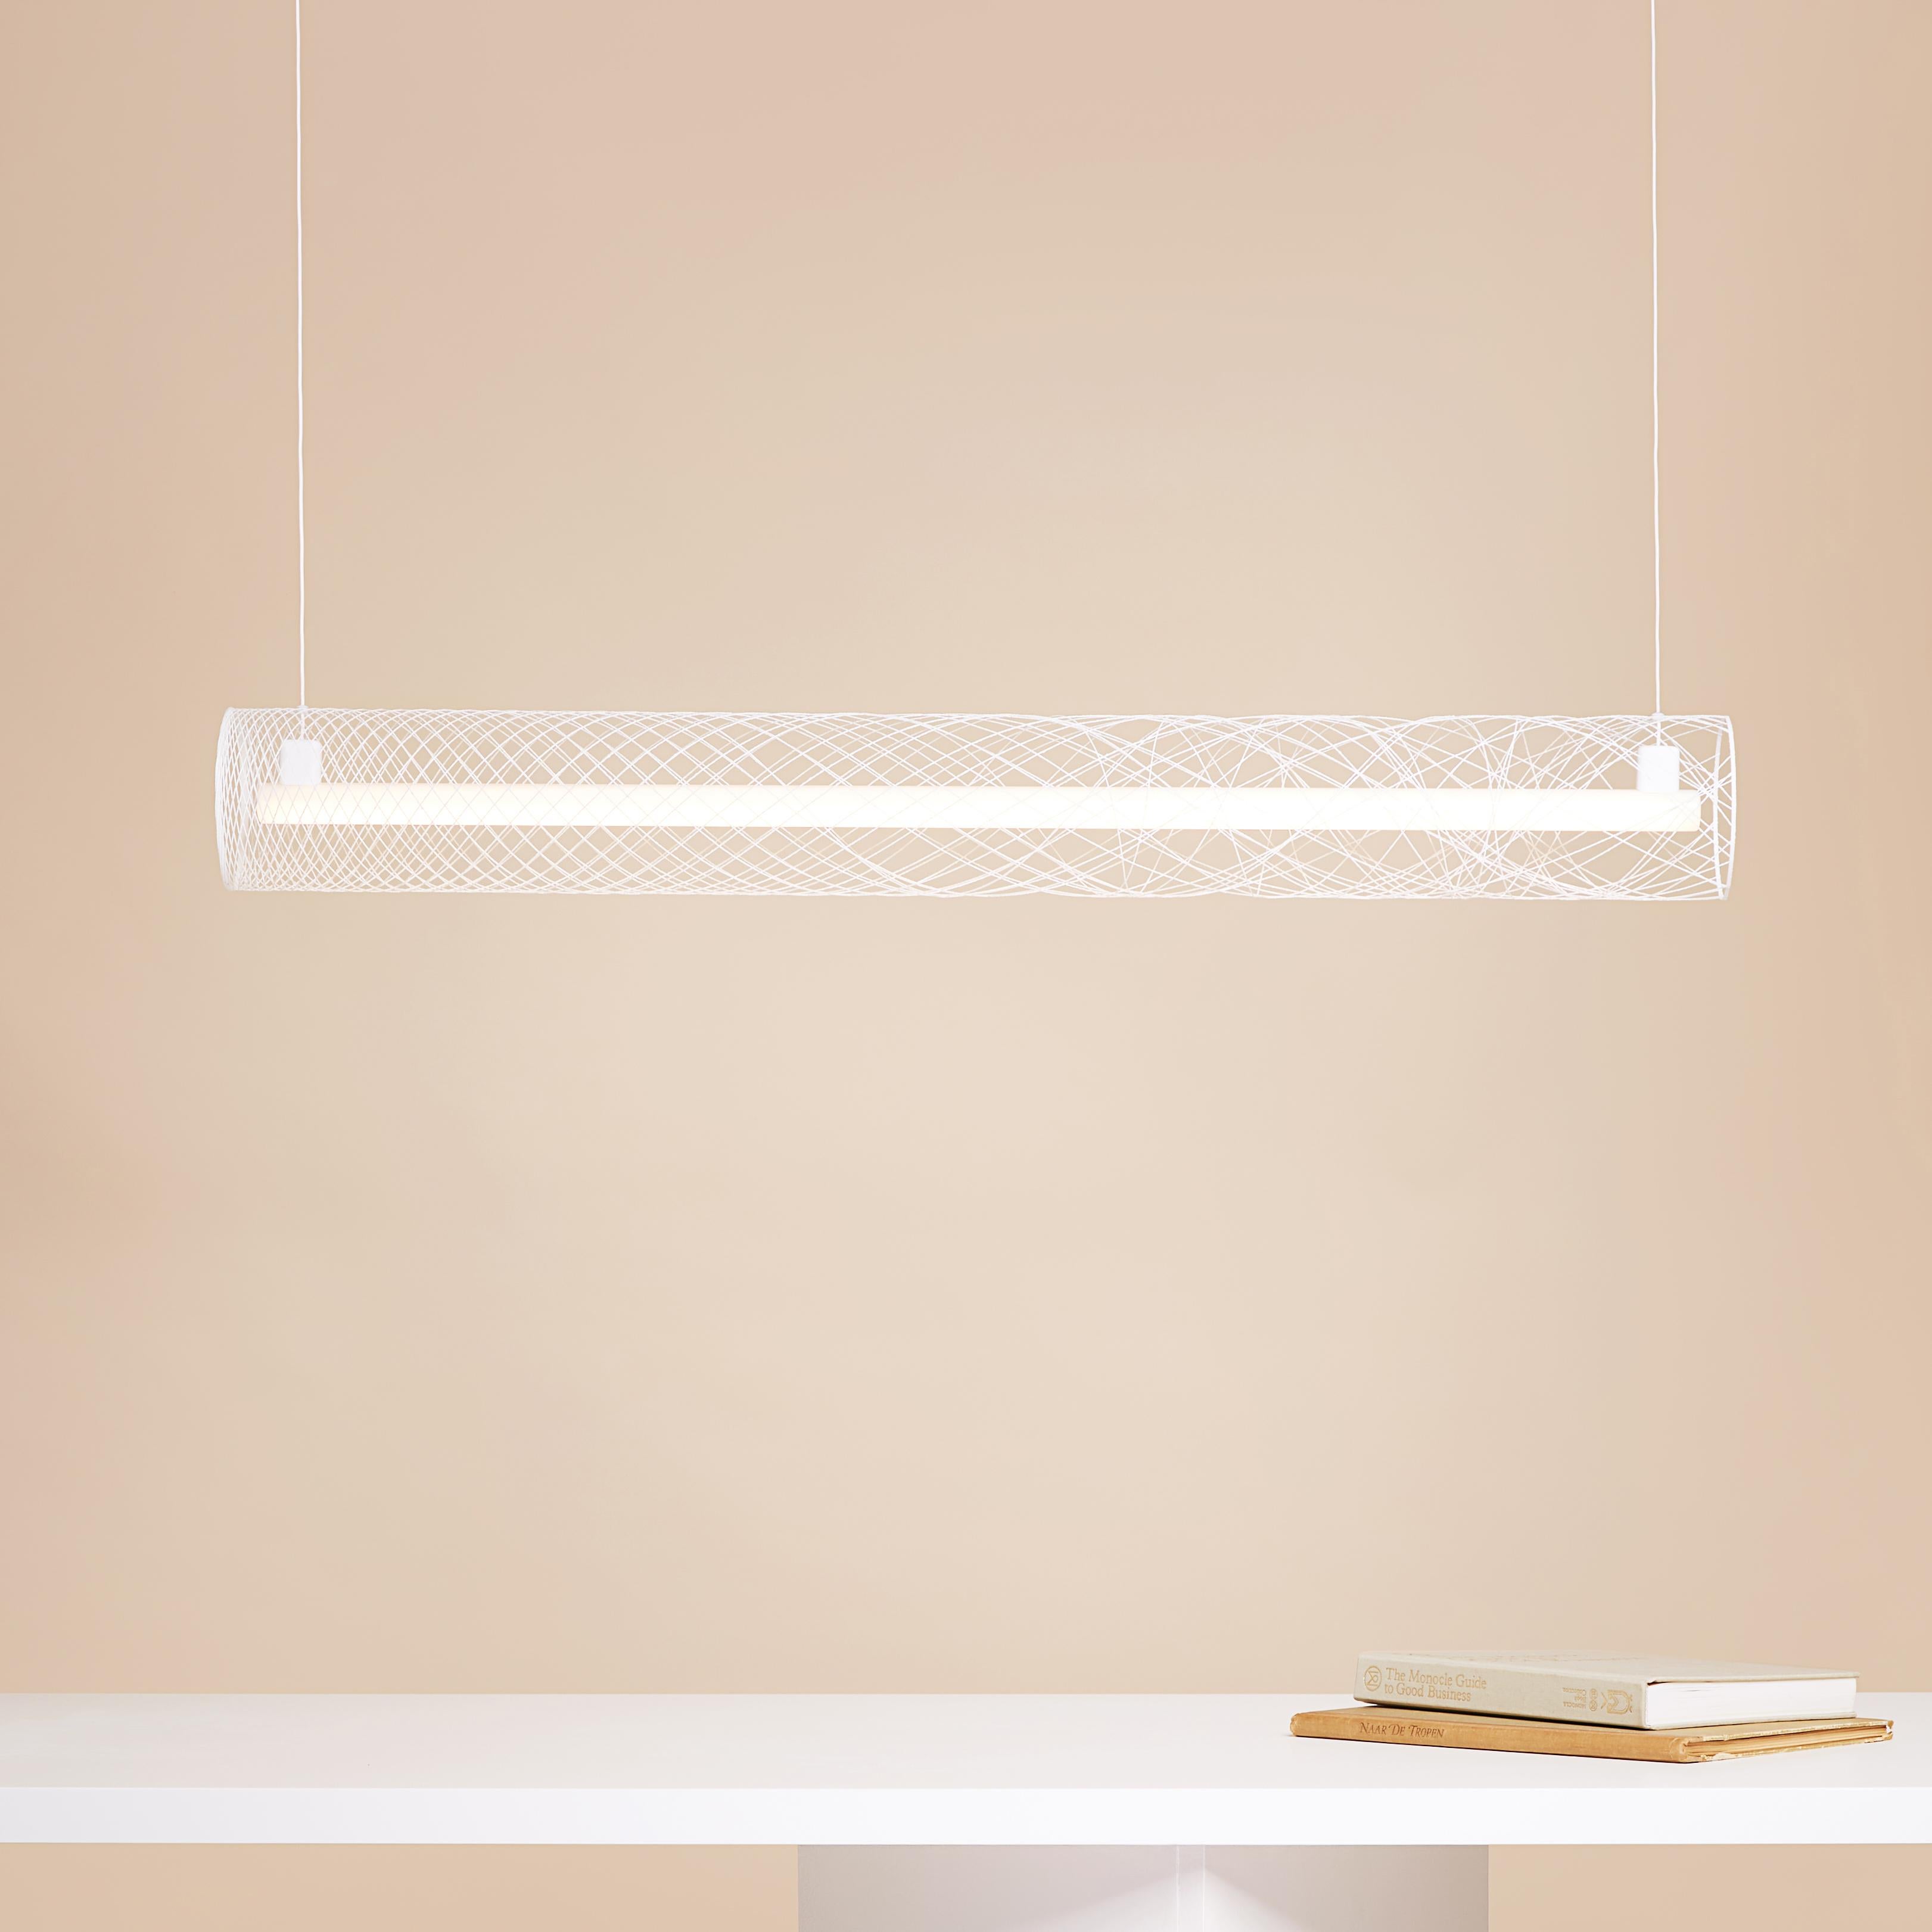 White Out Of Order pendant lamp by Atelier Robotiq
Dimensions: D 105 x H 13 cm
Materials: Resin-impregnated industrial fiber.
Available in different colors.

All our lamps can be wired according to each country. If sold to the USA it will be